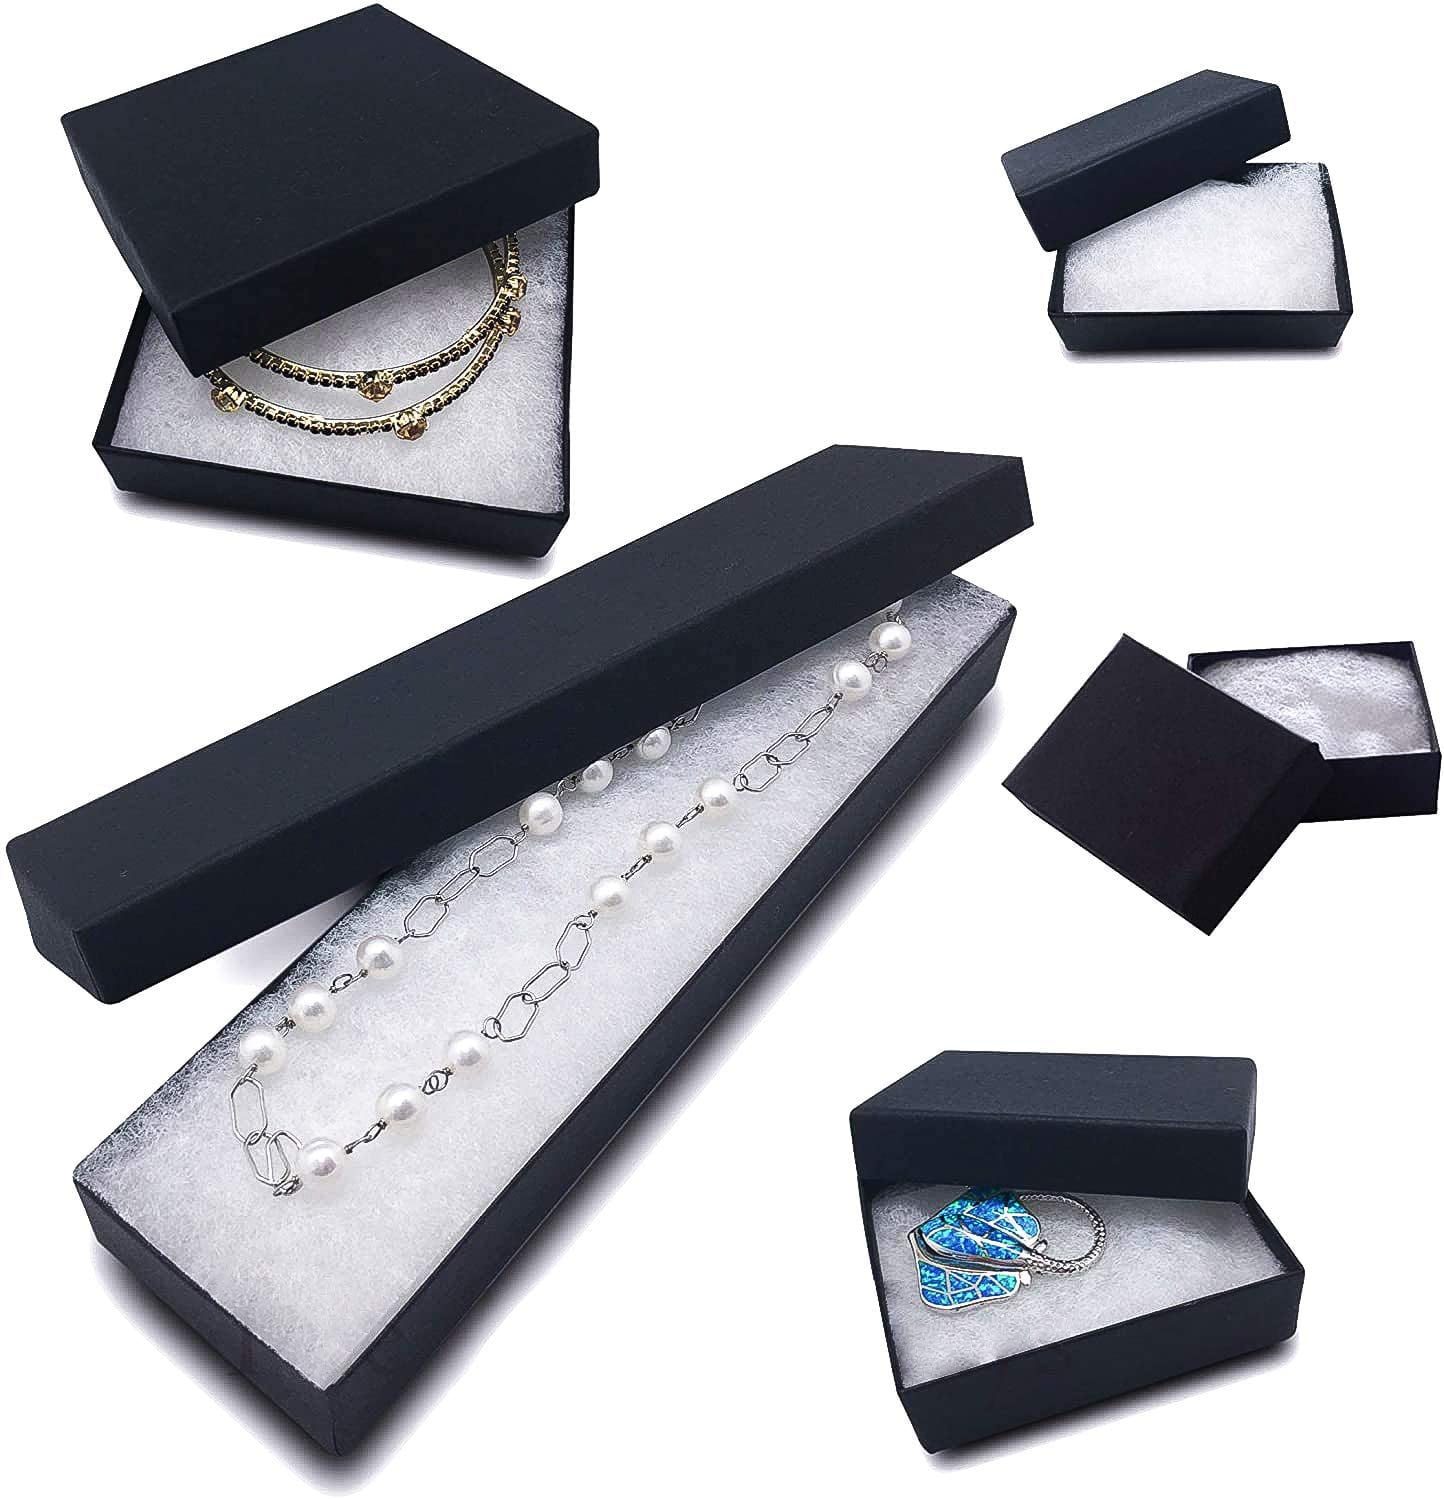 Wholesale Boxes for Jewelry – WF PACKAGING